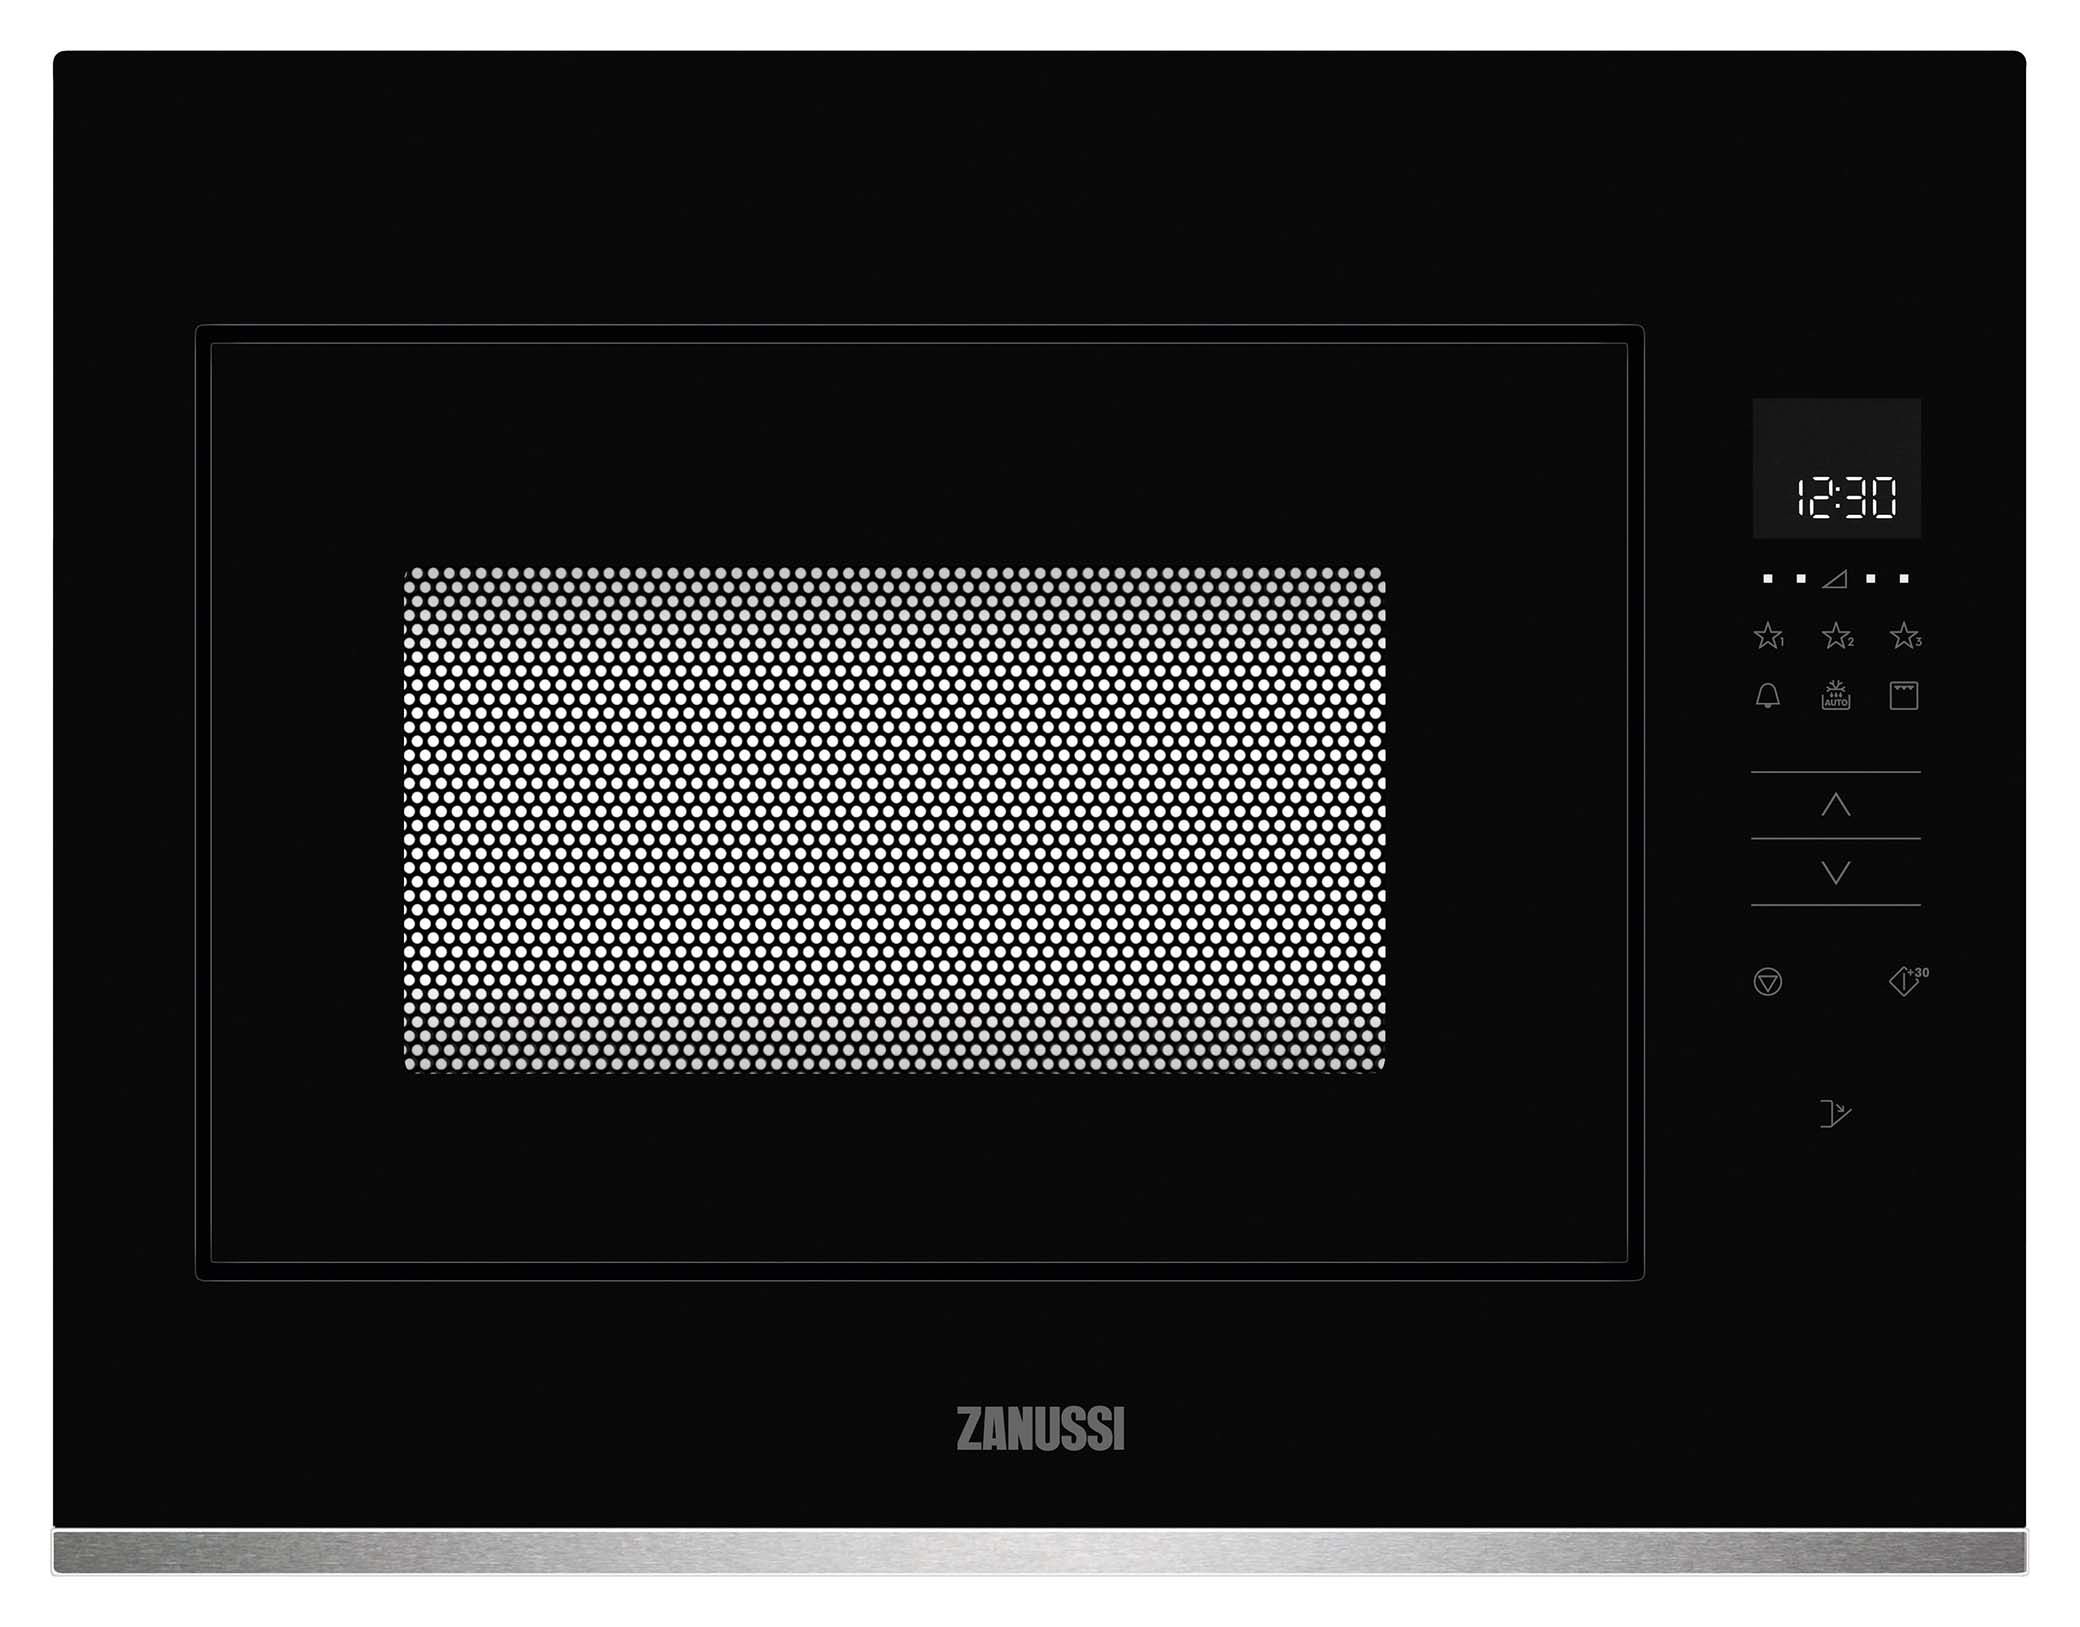 Zanussi ZMBN4DX 900W Microwave Oven - Black & Stainless Steel